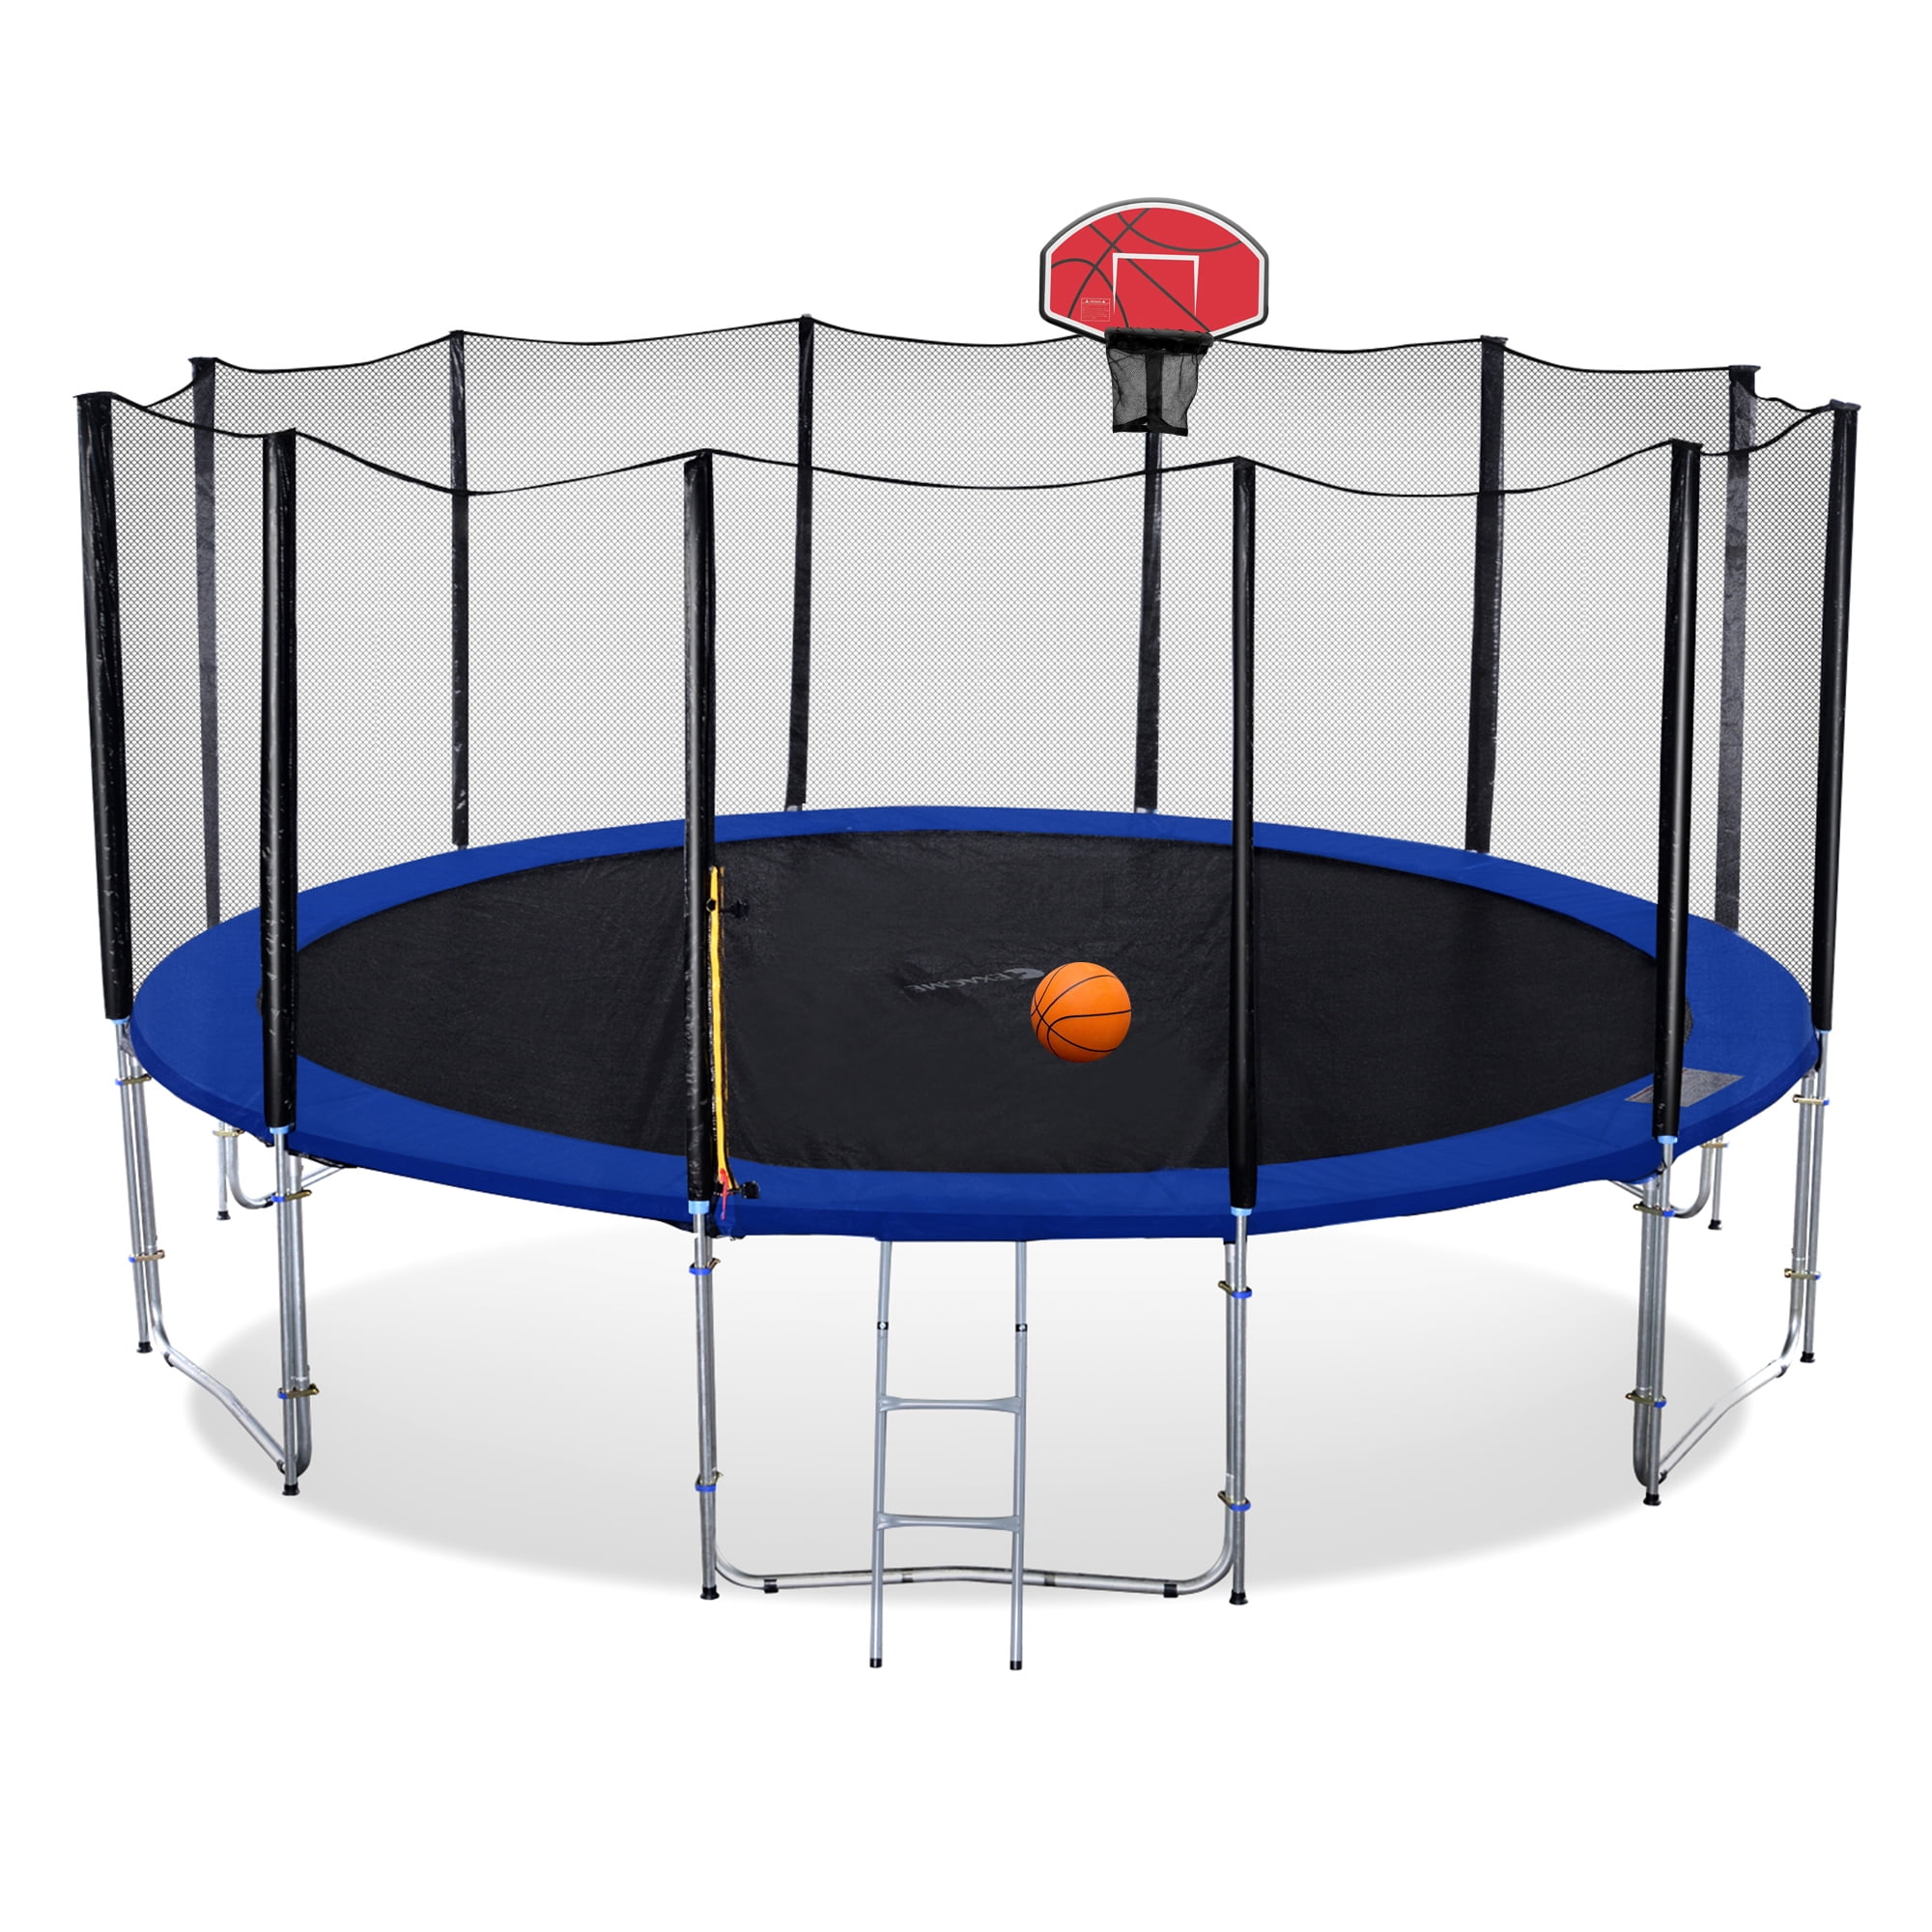 Exacme Exacme 16' Round Trampoline with Safety Enclosure Net and Basketball Hoop